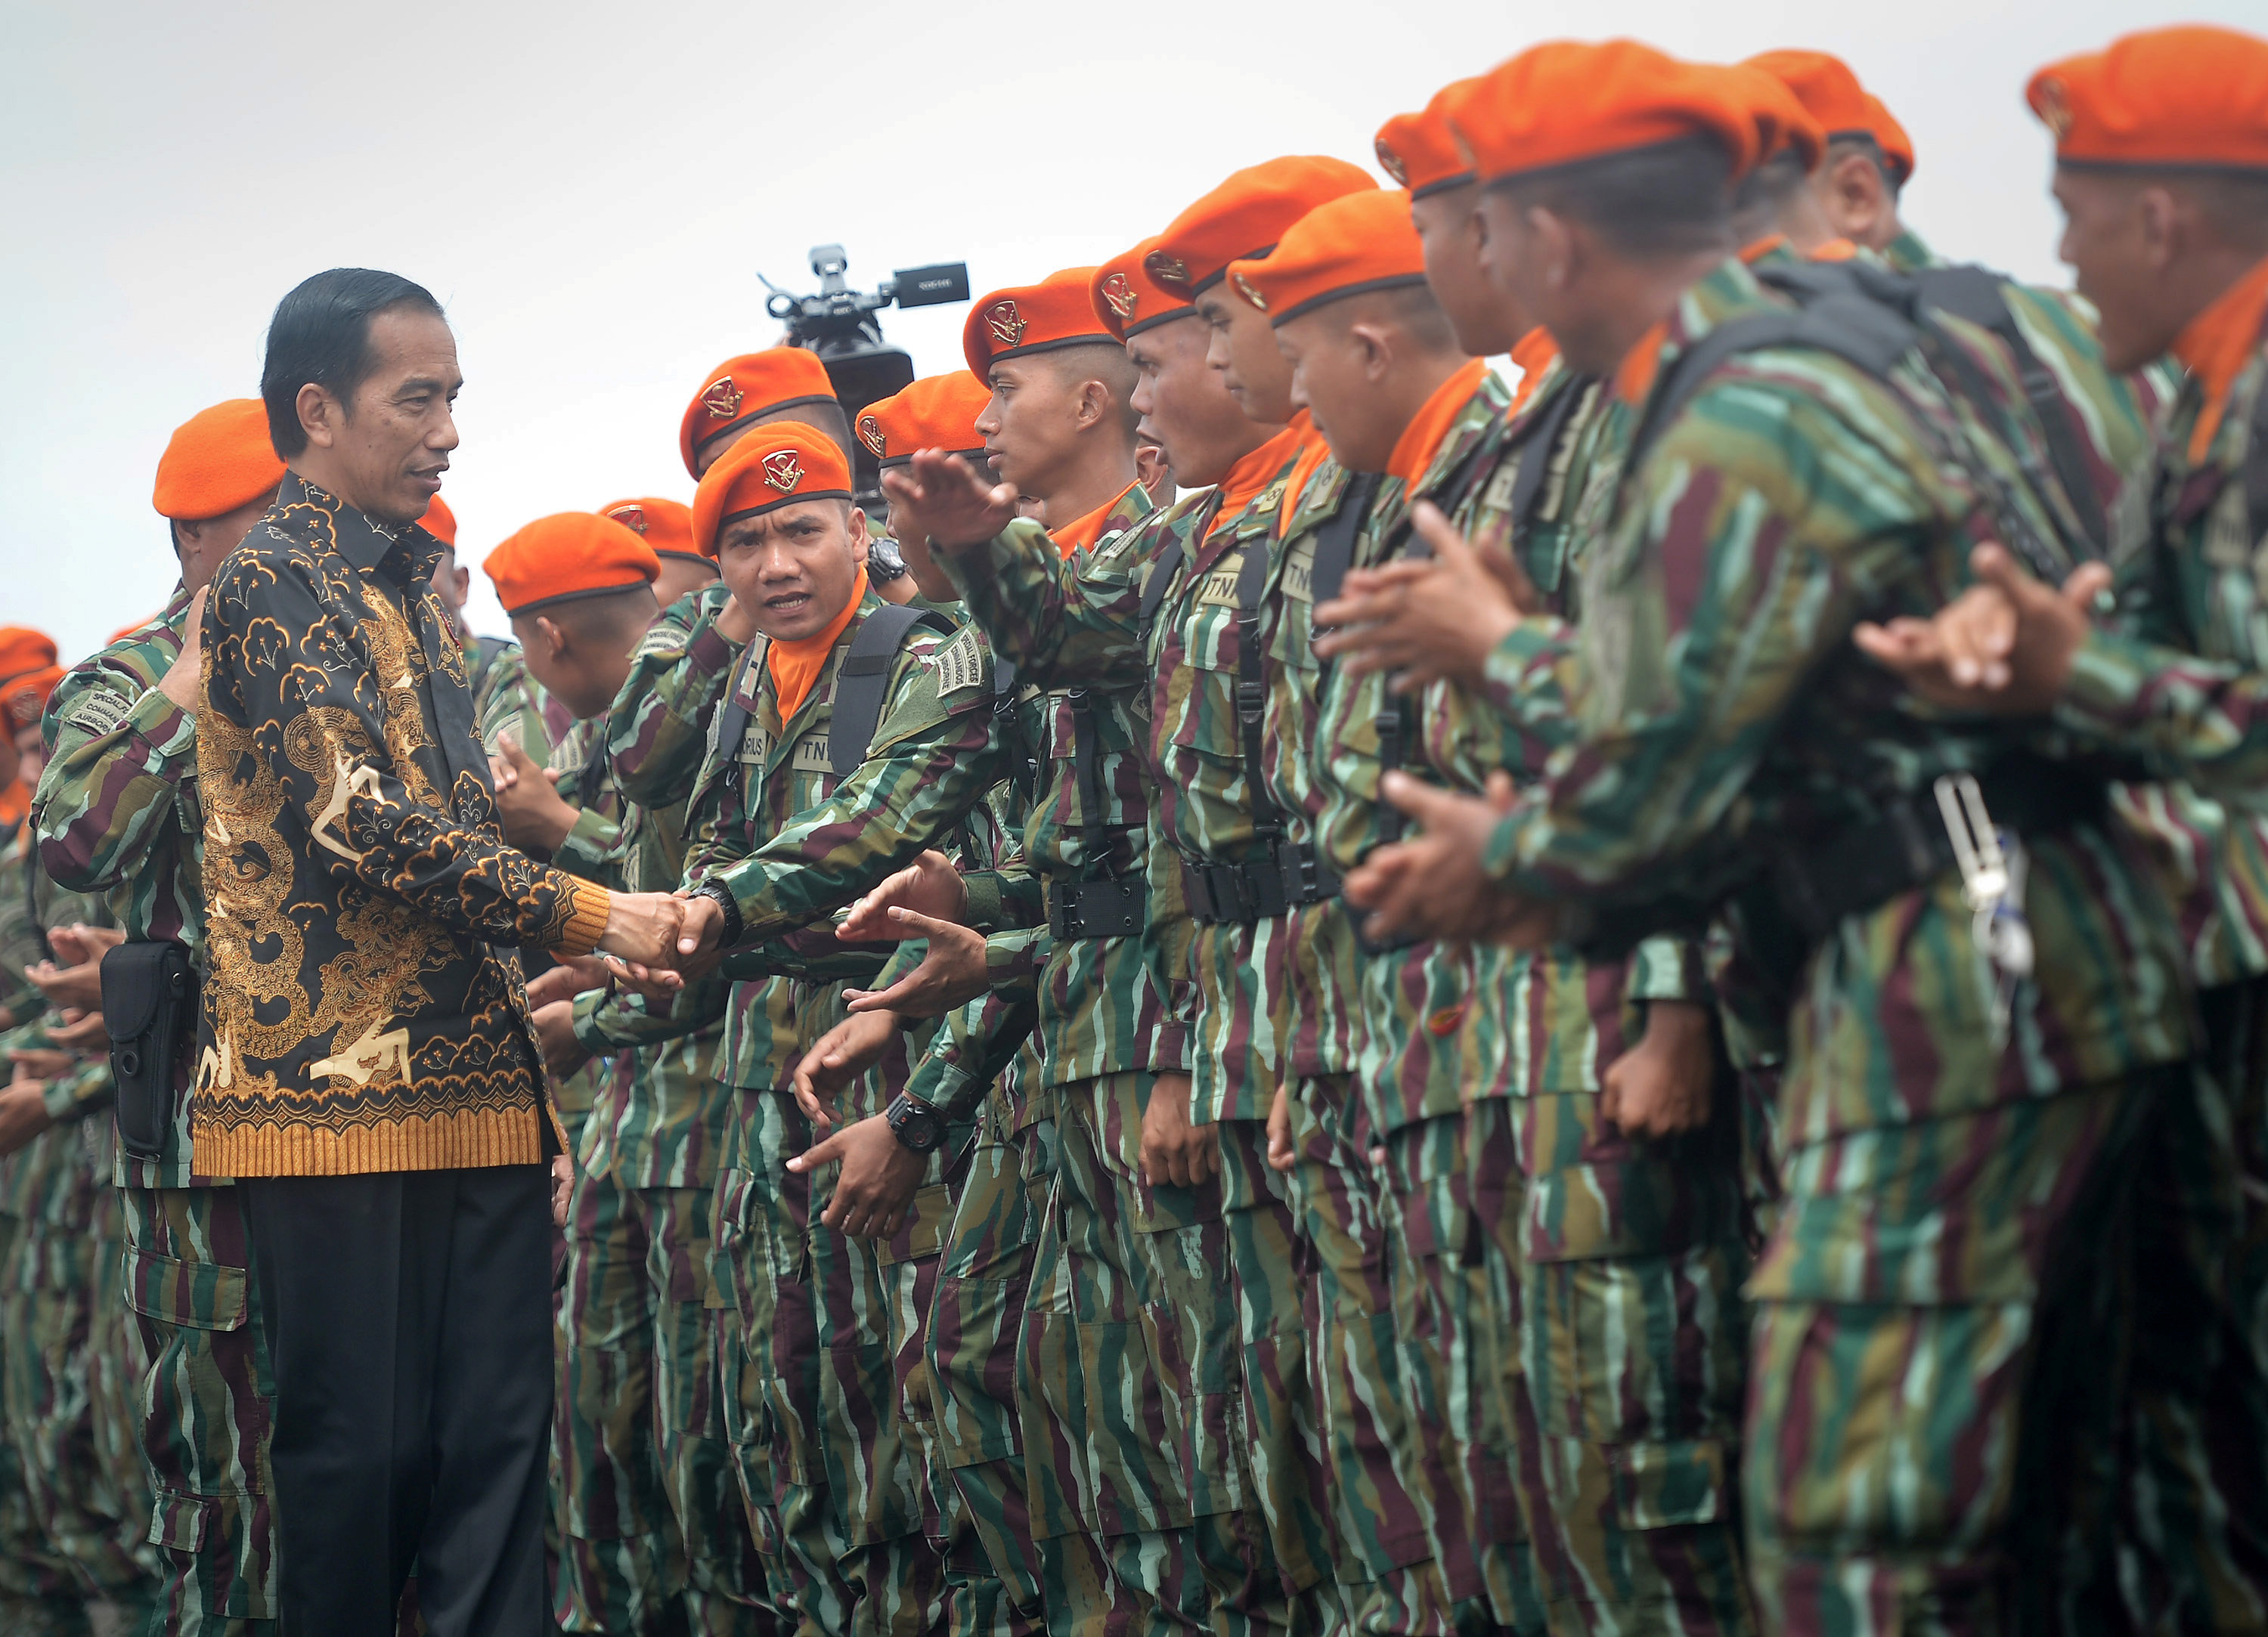 Indonesia President Joko Widodo (L) shakes hands with special unit of Indonesia Air Force soldiers in Bandung, Indonesia West Java province, November 15, 2016 in this photo taken by Antara Foto. Antara Foto/Yudhi Mahatma/ via REUTERSATTENTION EDITORS - TH